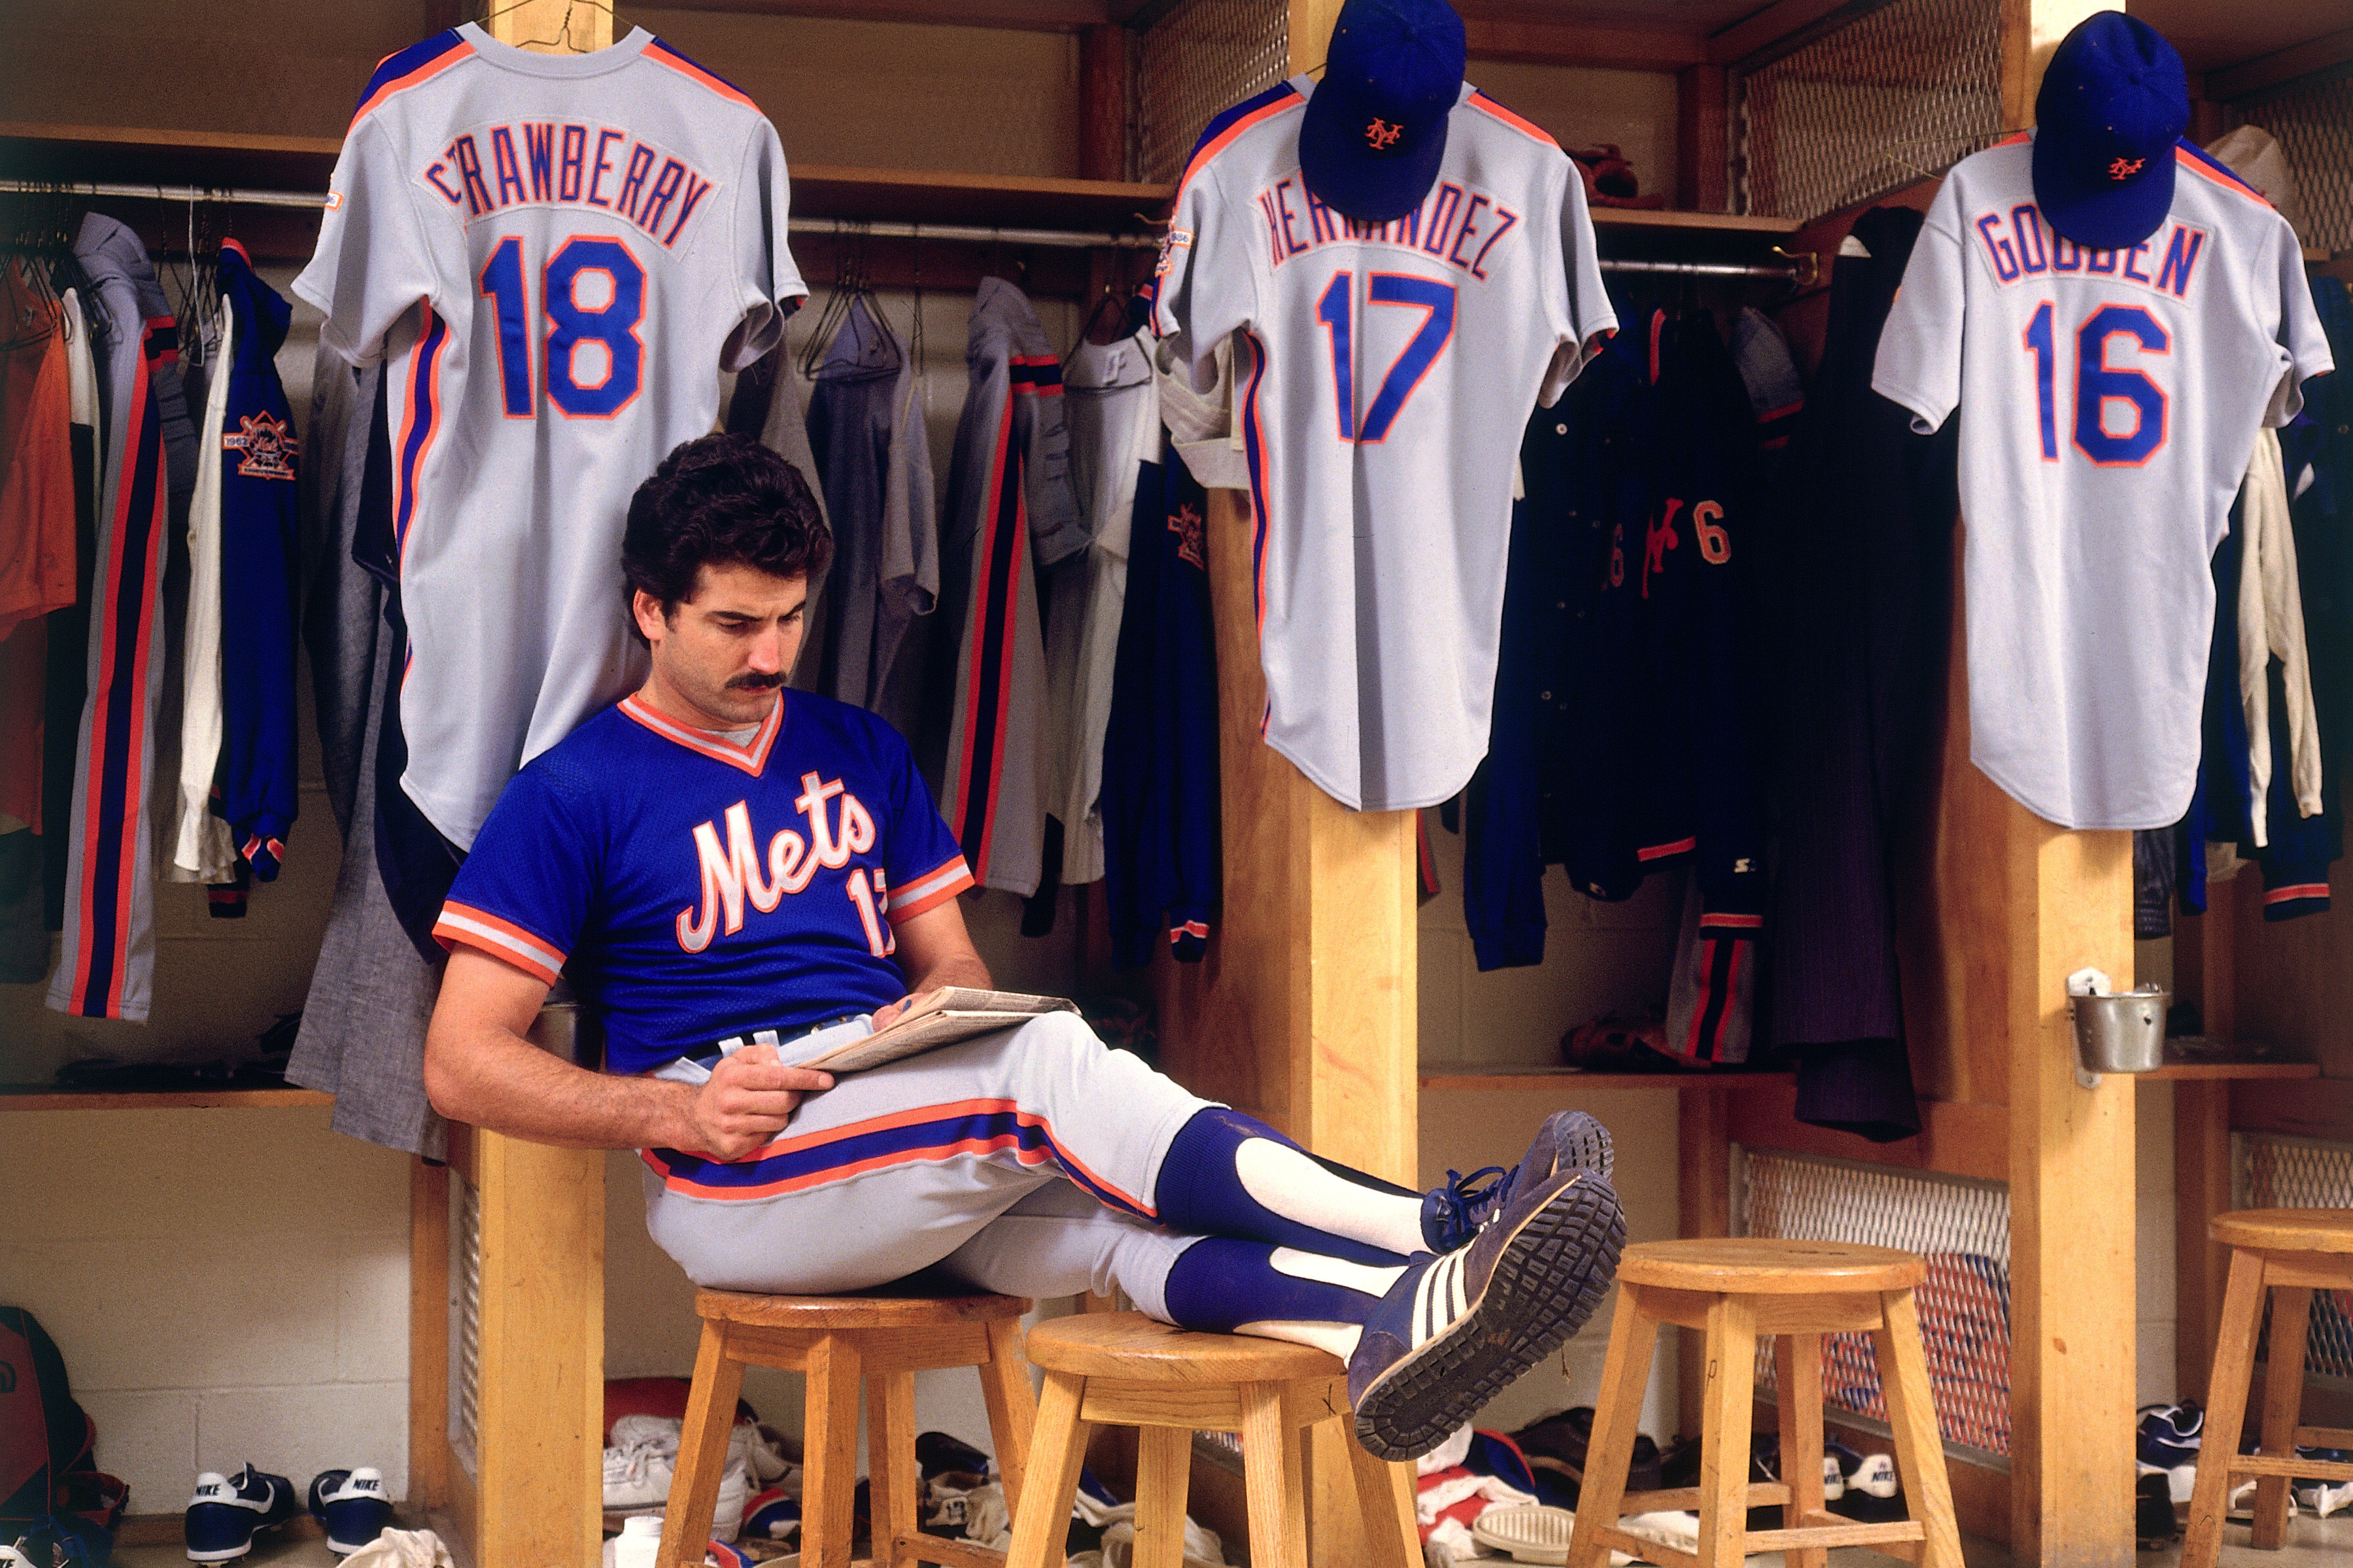 Keith Hernandez's '86 Mets jersey was top selling throwback in New York in  2015 – New York Daily News